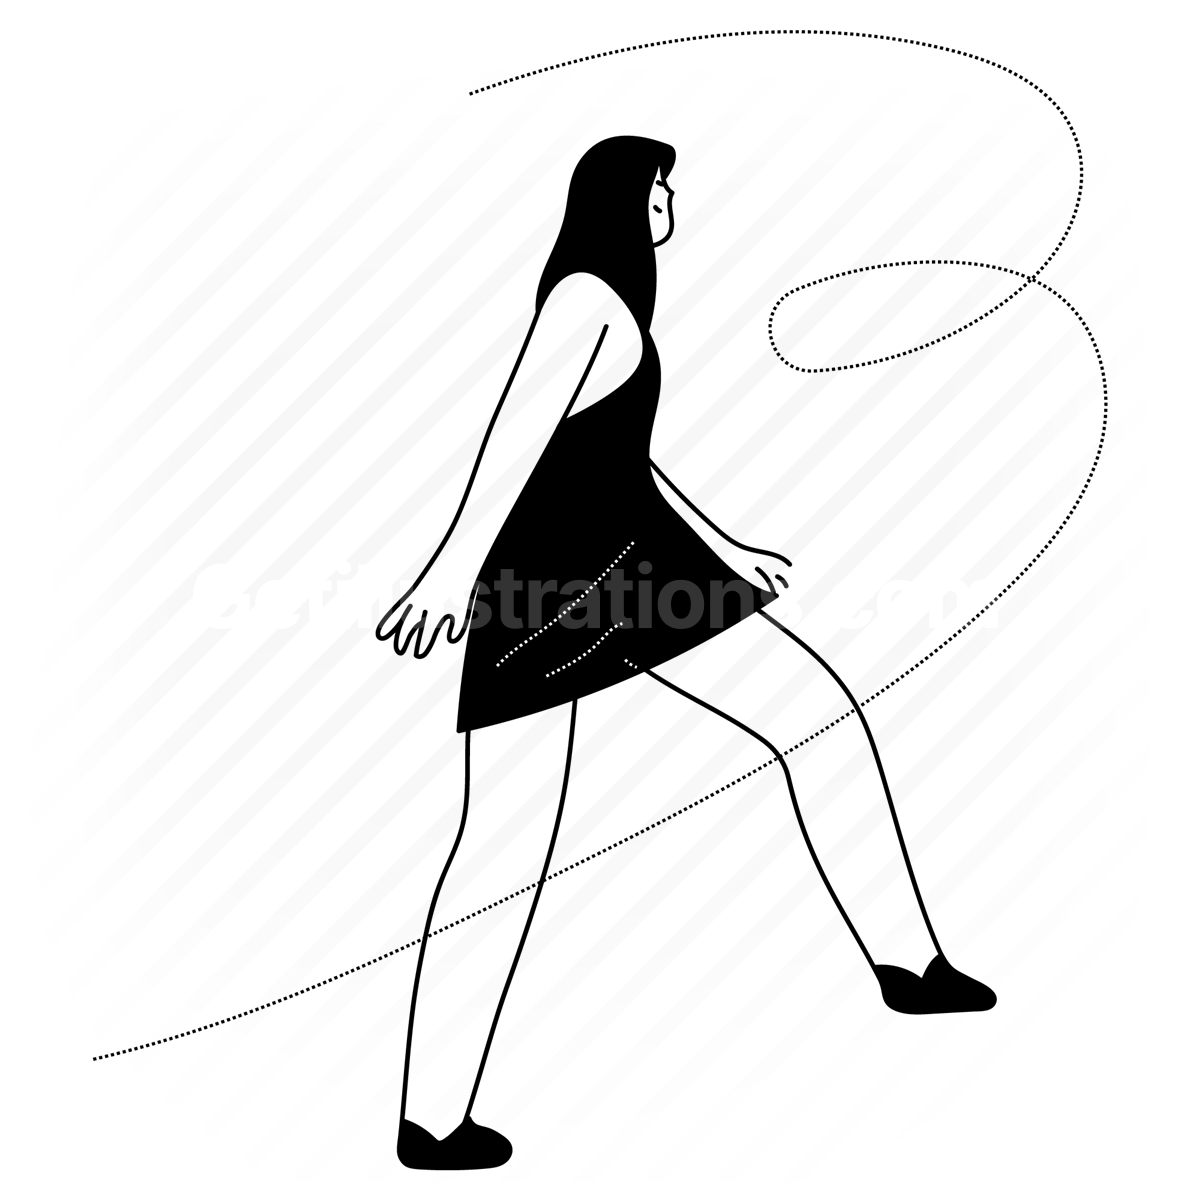 movement, motion, climb, up, stairs, woman, people, person